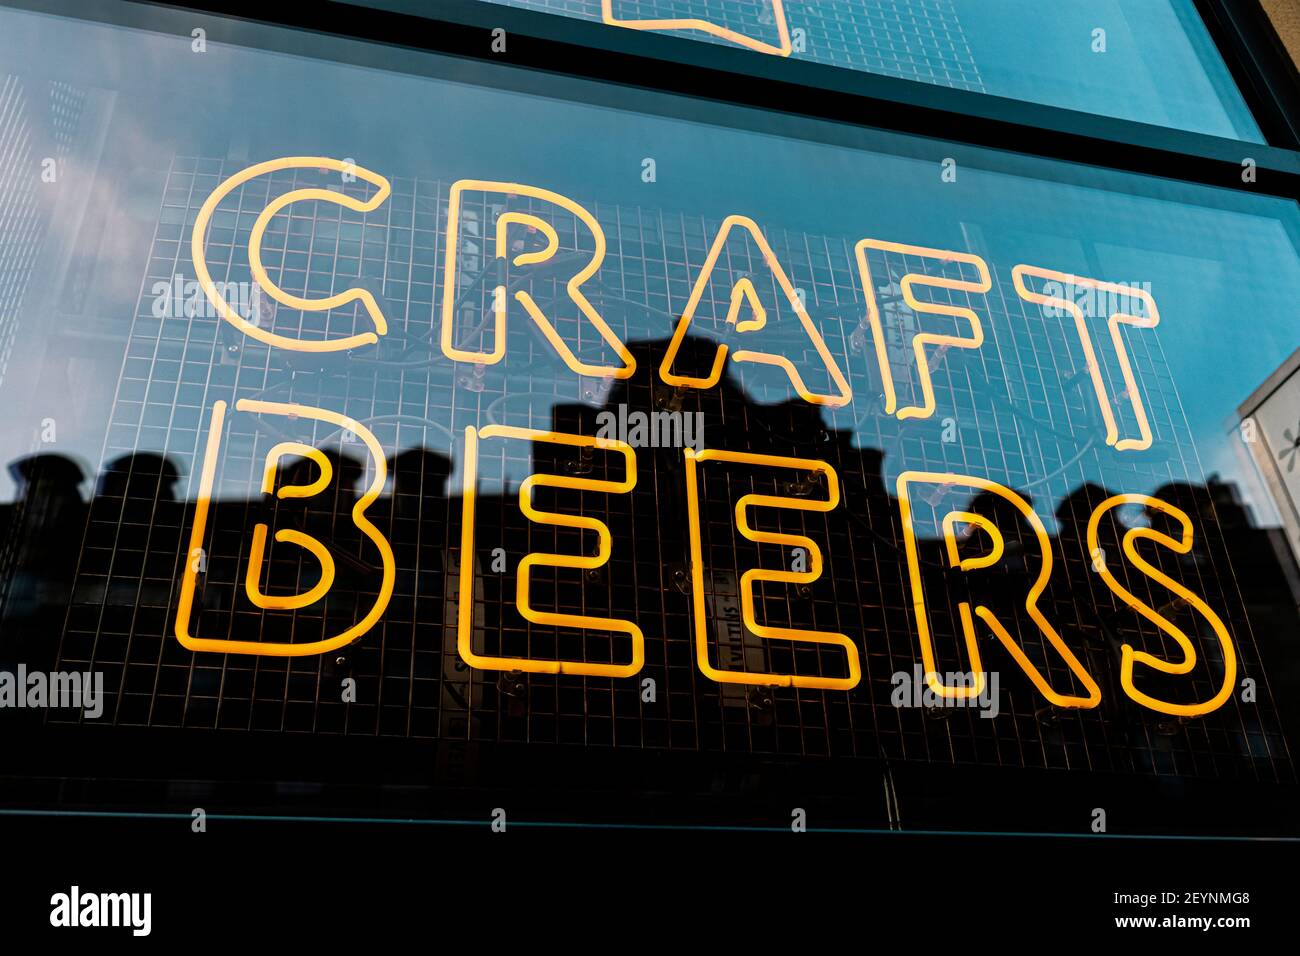 Newcastle upon Tyne/UK - 8th Jan 2020: Craft Beers neon sign in Hipster bar window Stock Photo